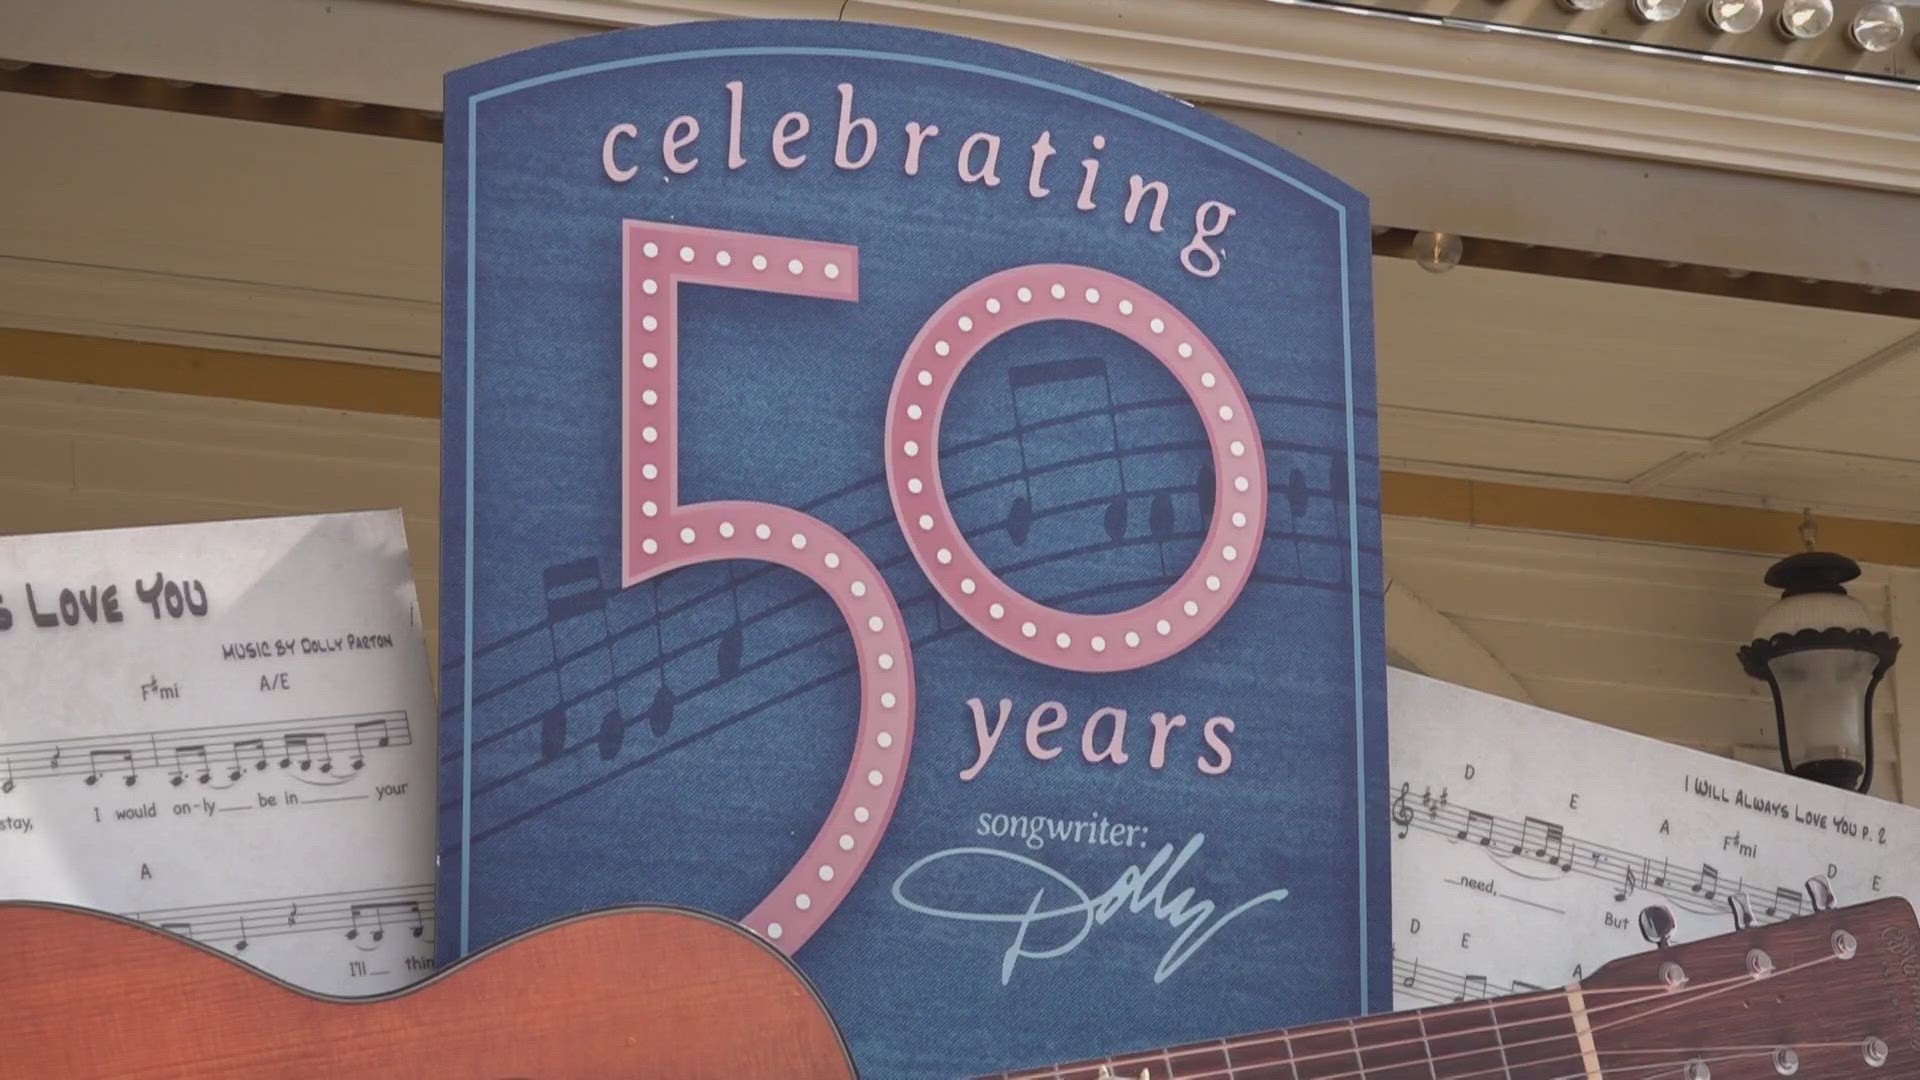 The park is celebrating 50 years since Dolly wrote: "I Will Always Love You".